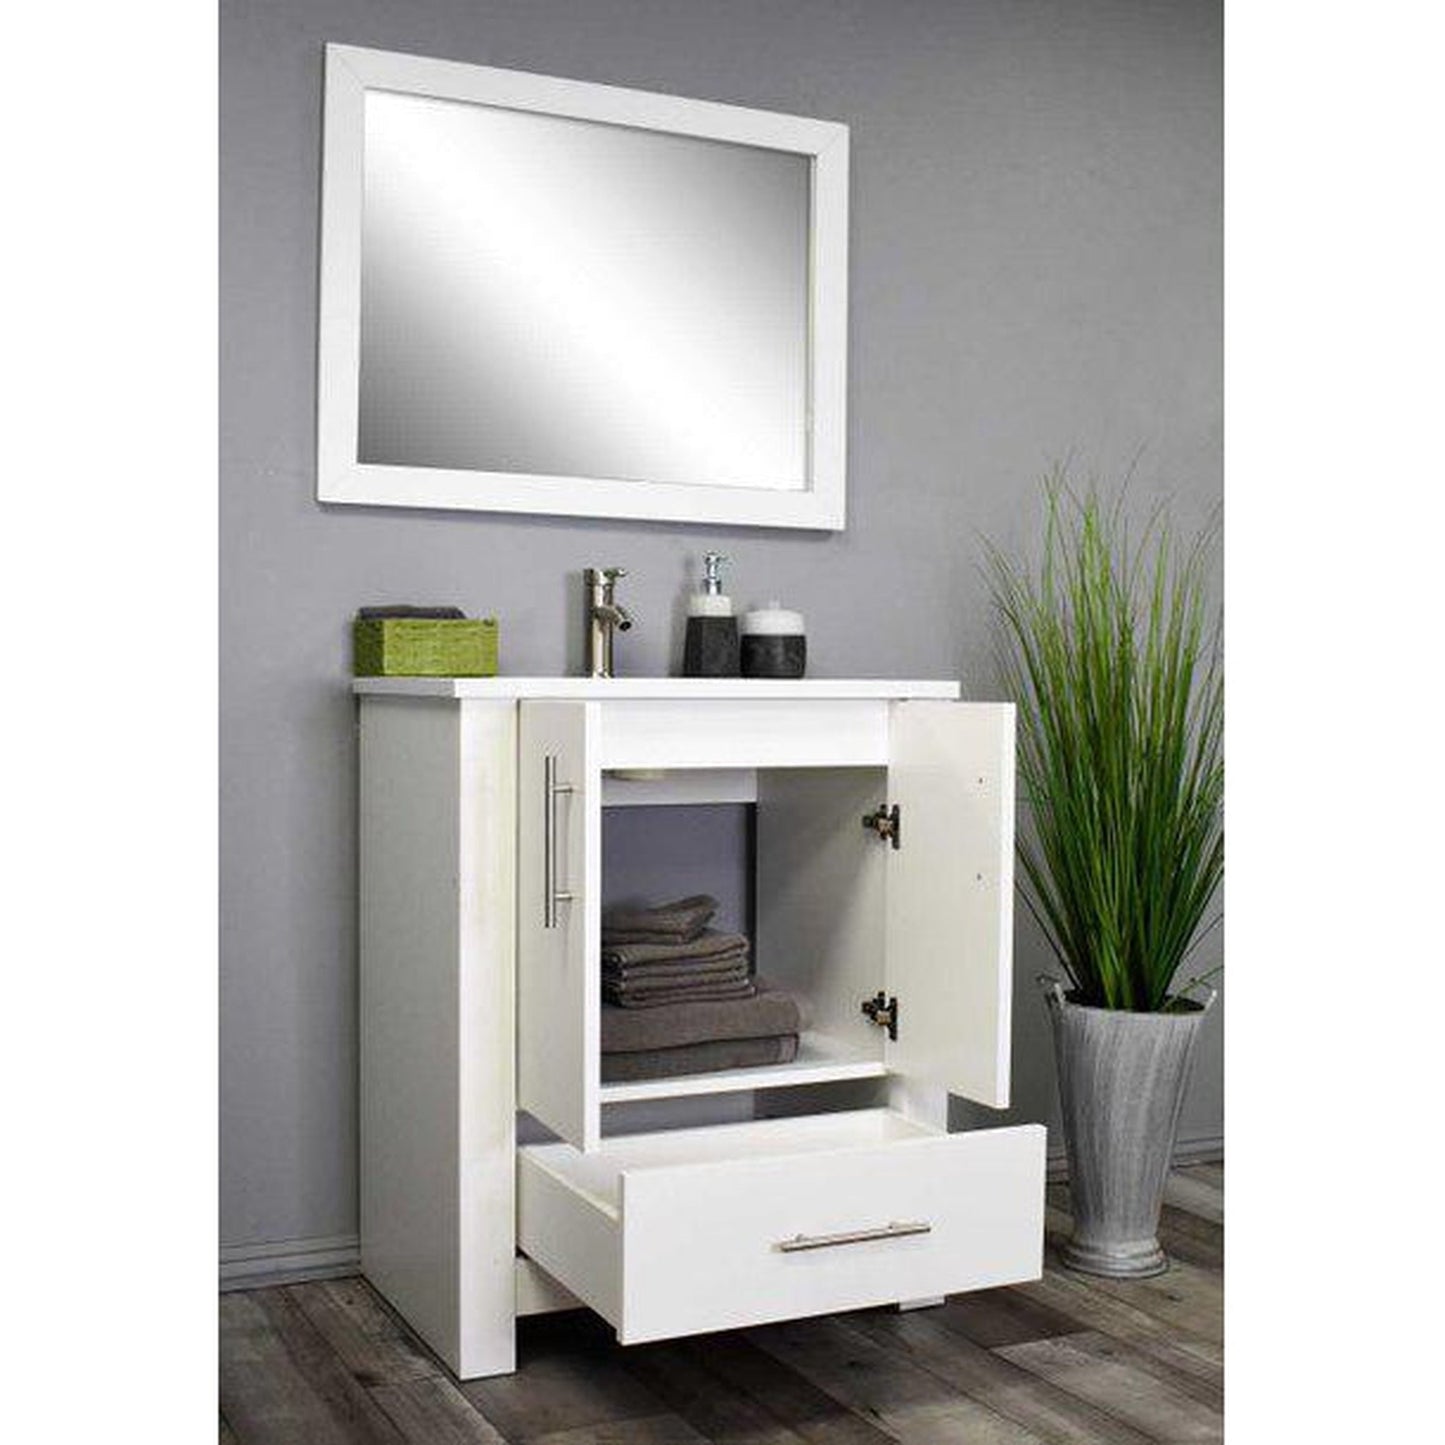 Volpa USA Boston 24" x 20" Glossy White Modern Freestanding Bathroom Vanity With Acrylic Top, Integrated Acrylic Sink And Brushed Nickel Handles